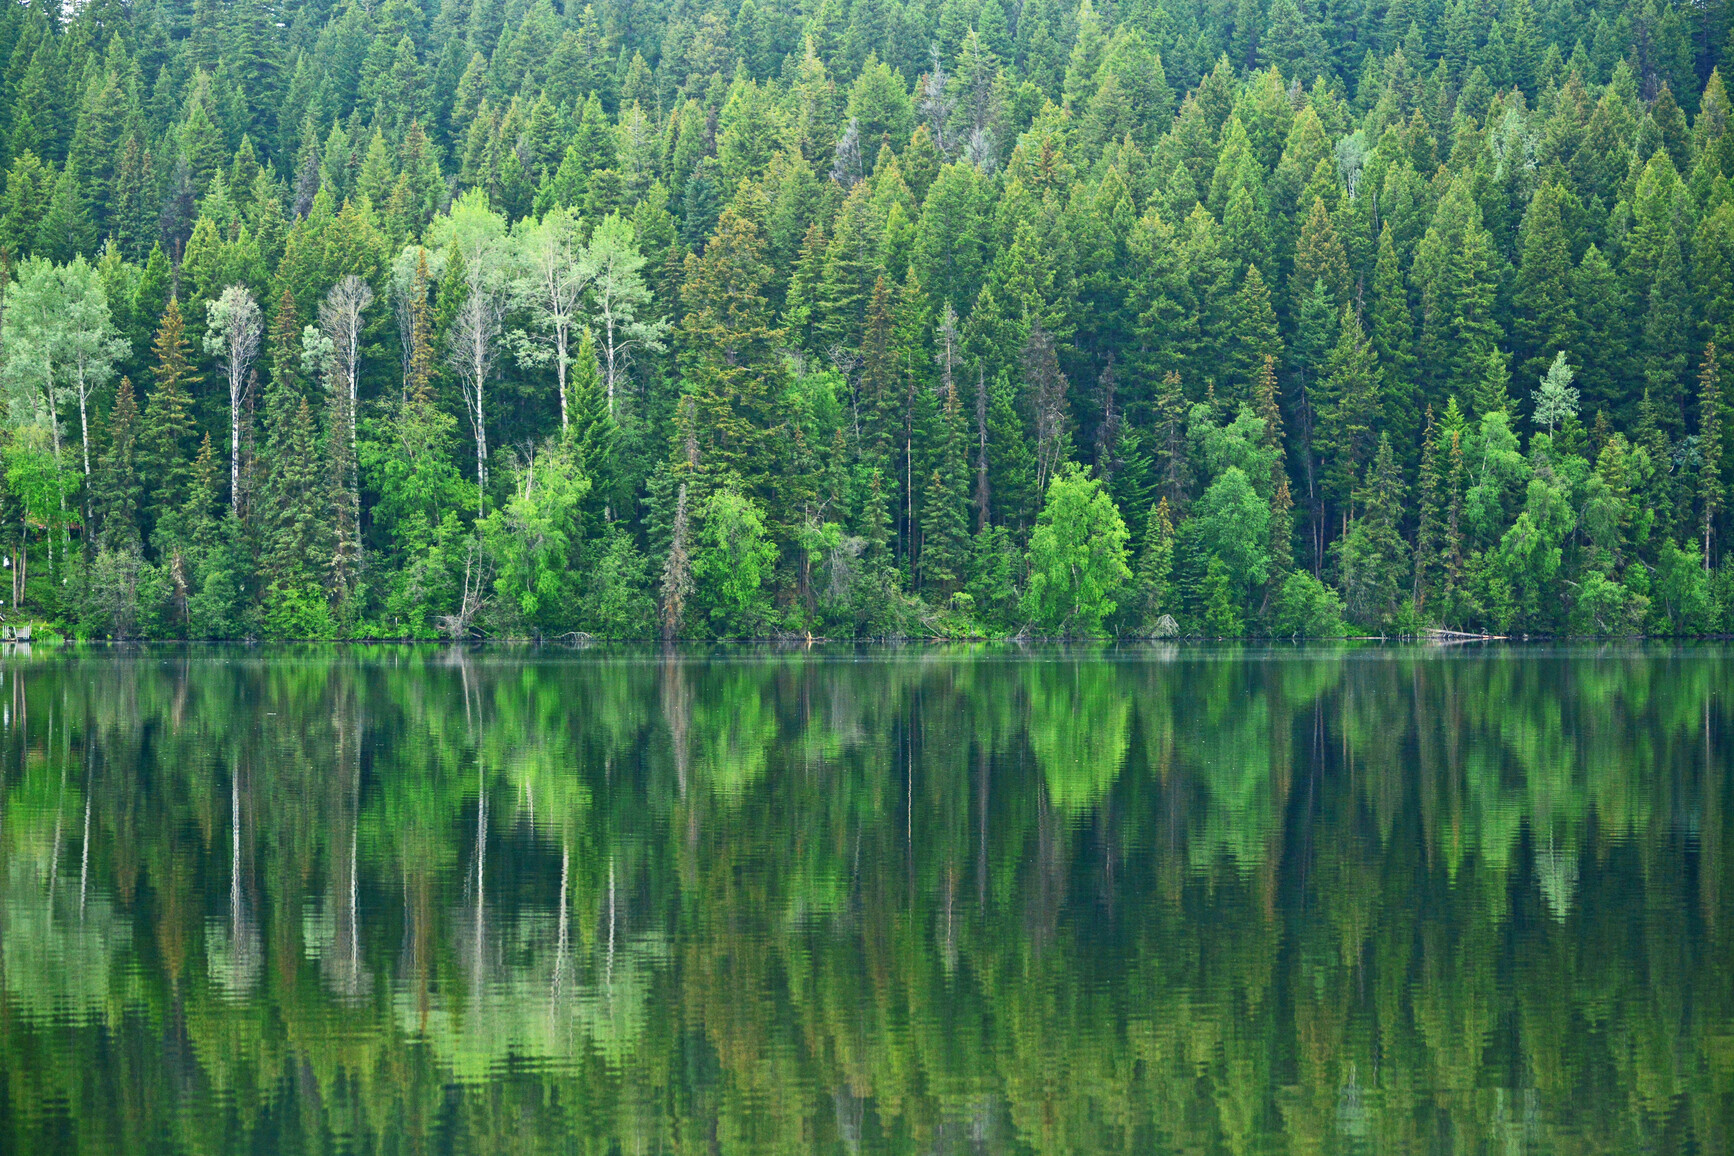 The green forest of Bridge Lake Park reflects on the still, calm water of the lake.